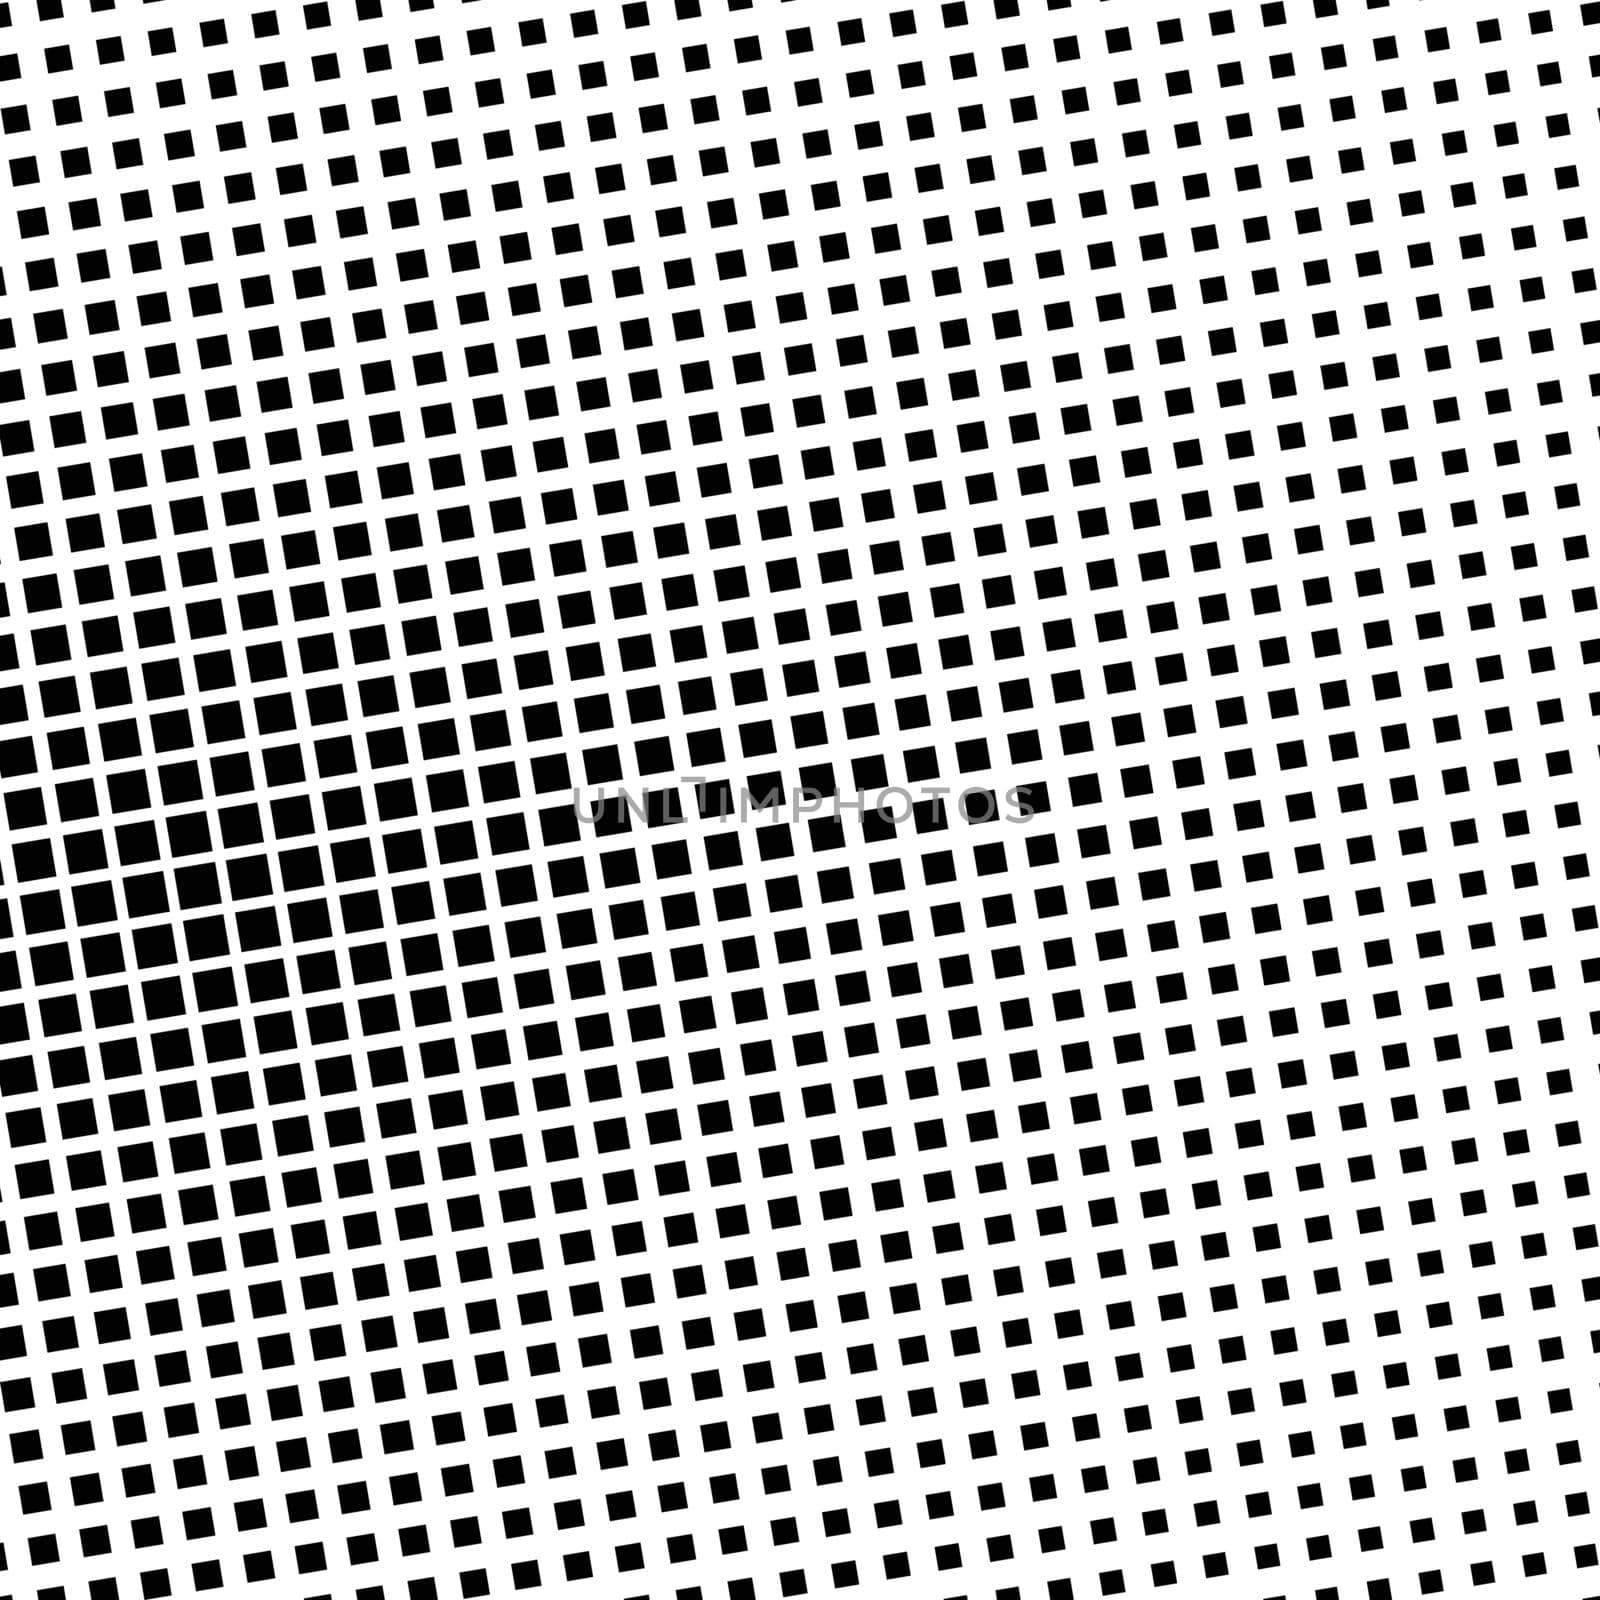 Pop art creative concept black and white comics book magazine cover. Polka dots monochrome background. Cartoon halftone retro pattern. Abstract design for poster, card, sale banner, empty bubble.